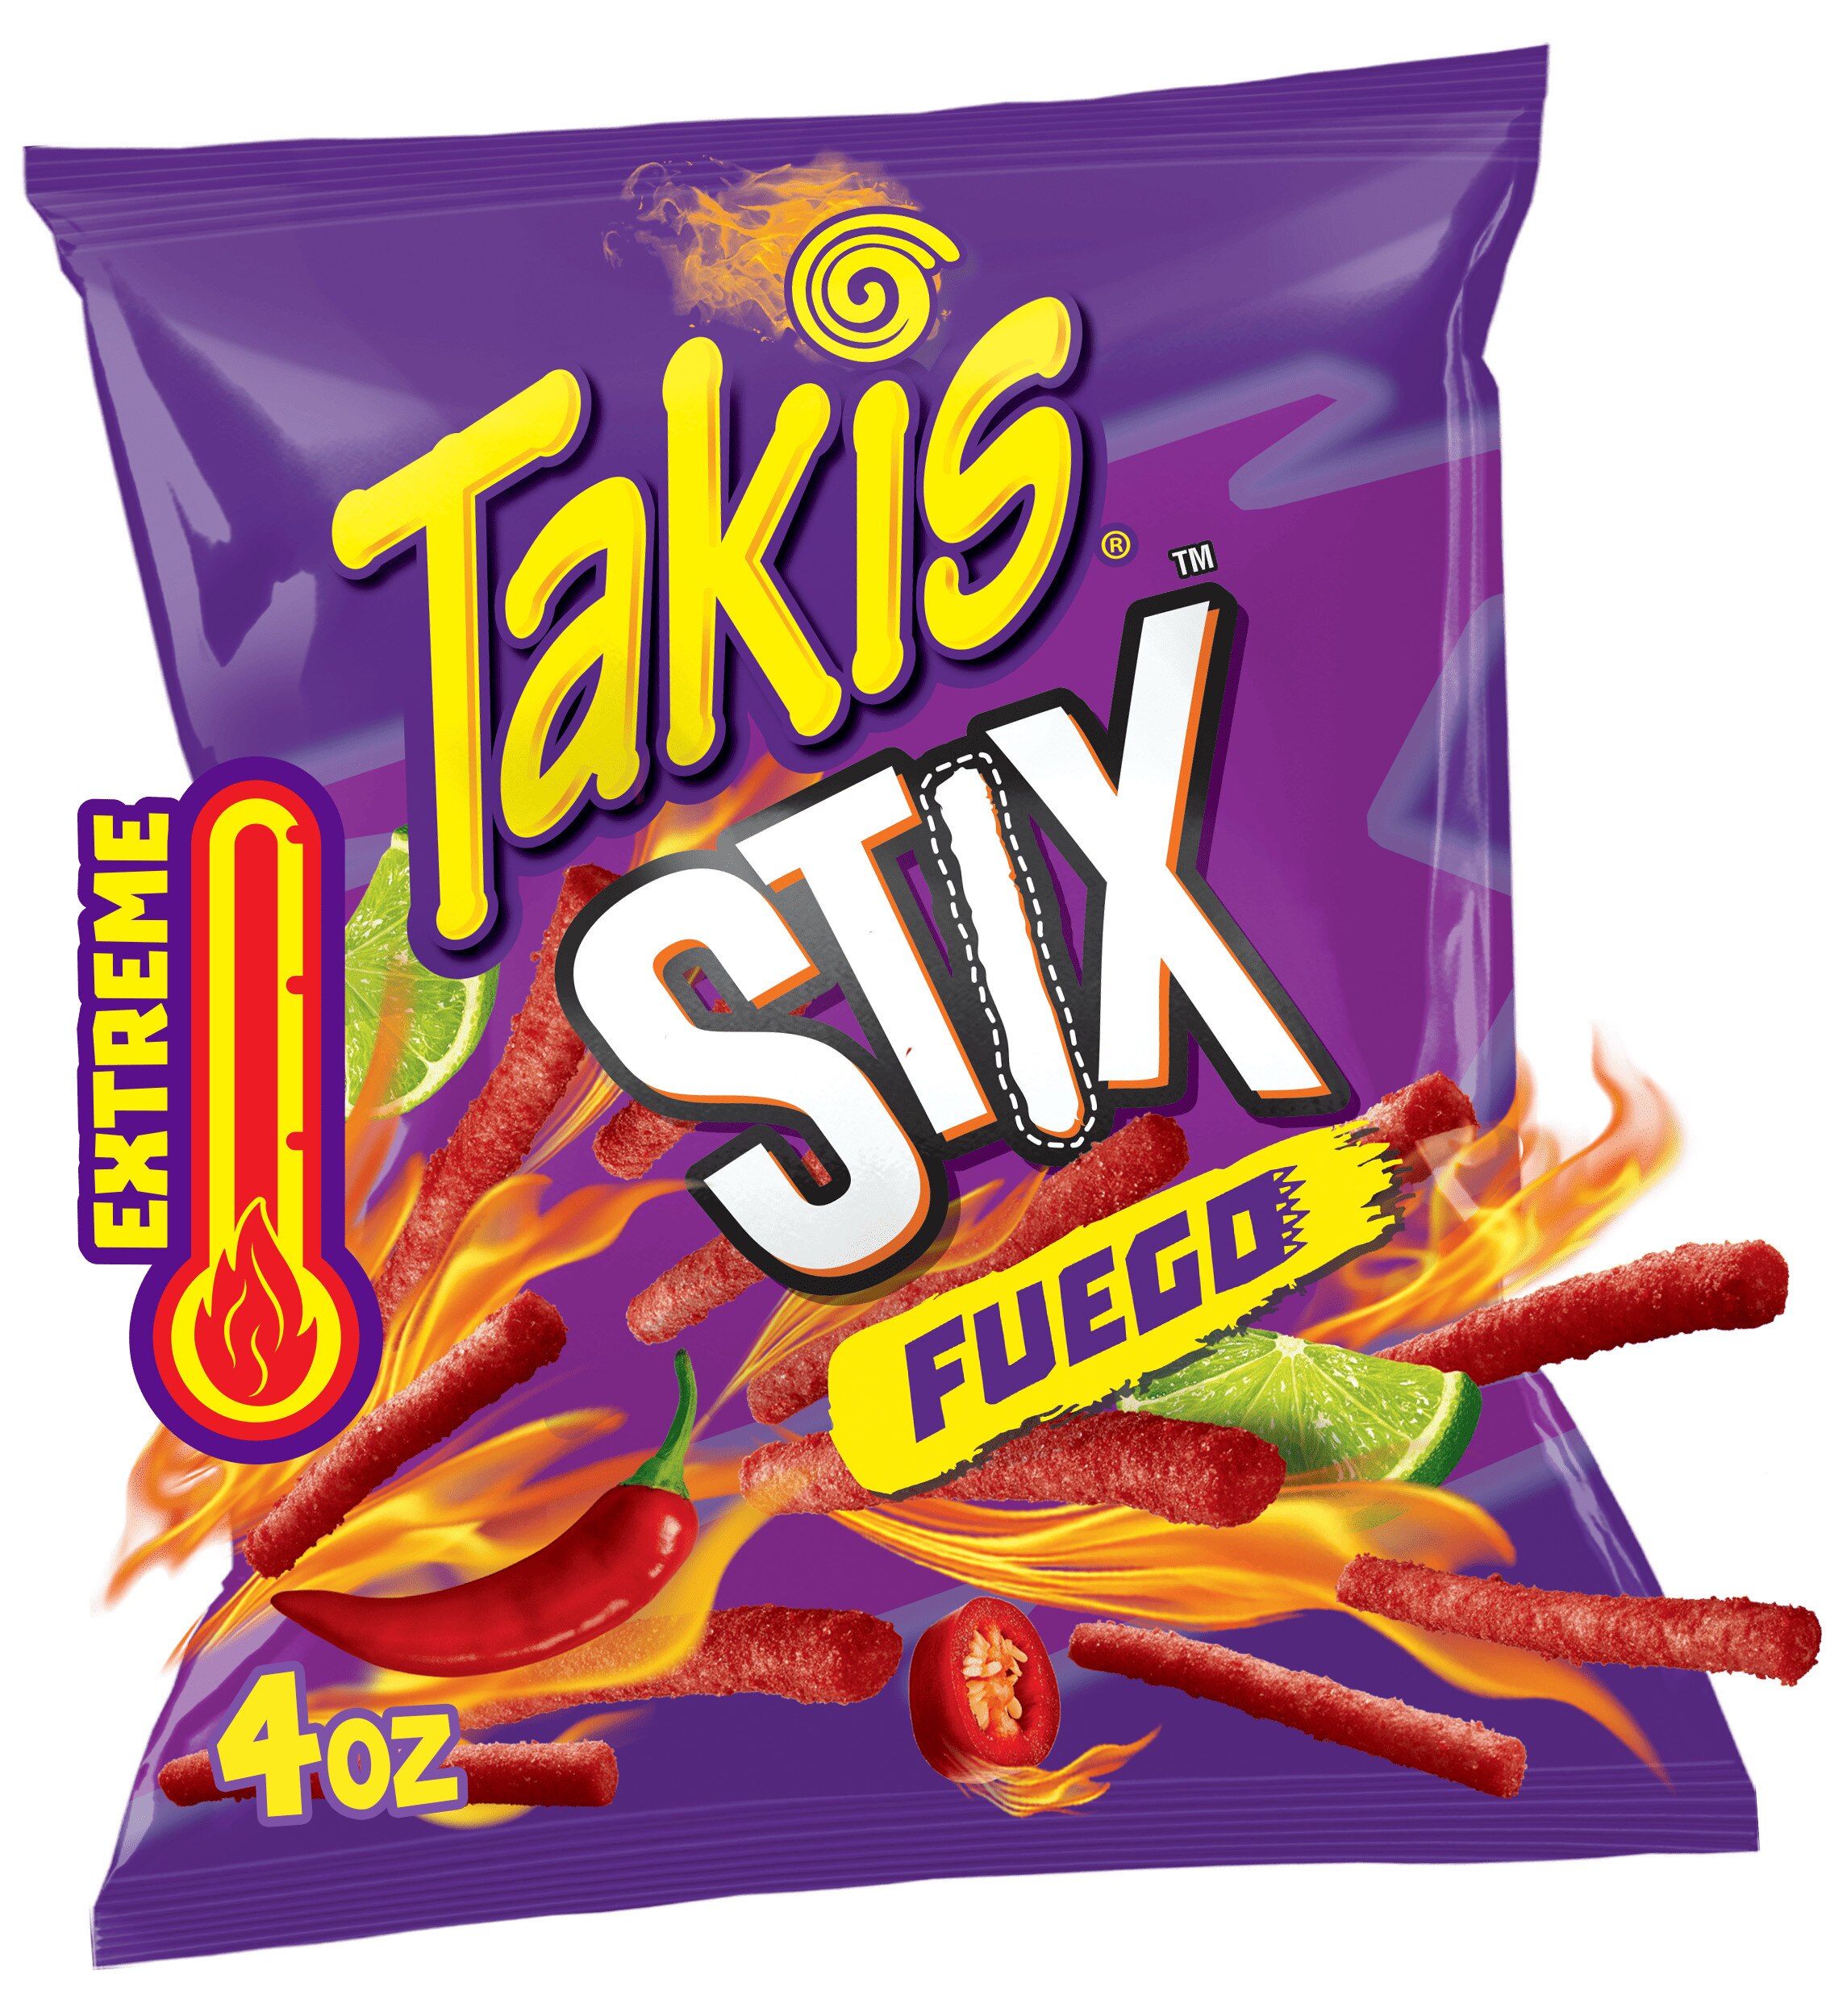 Takis Fuego Stix Hot Chili Pepper & Lime Flavored Spicy Corn Chips, 4 oz